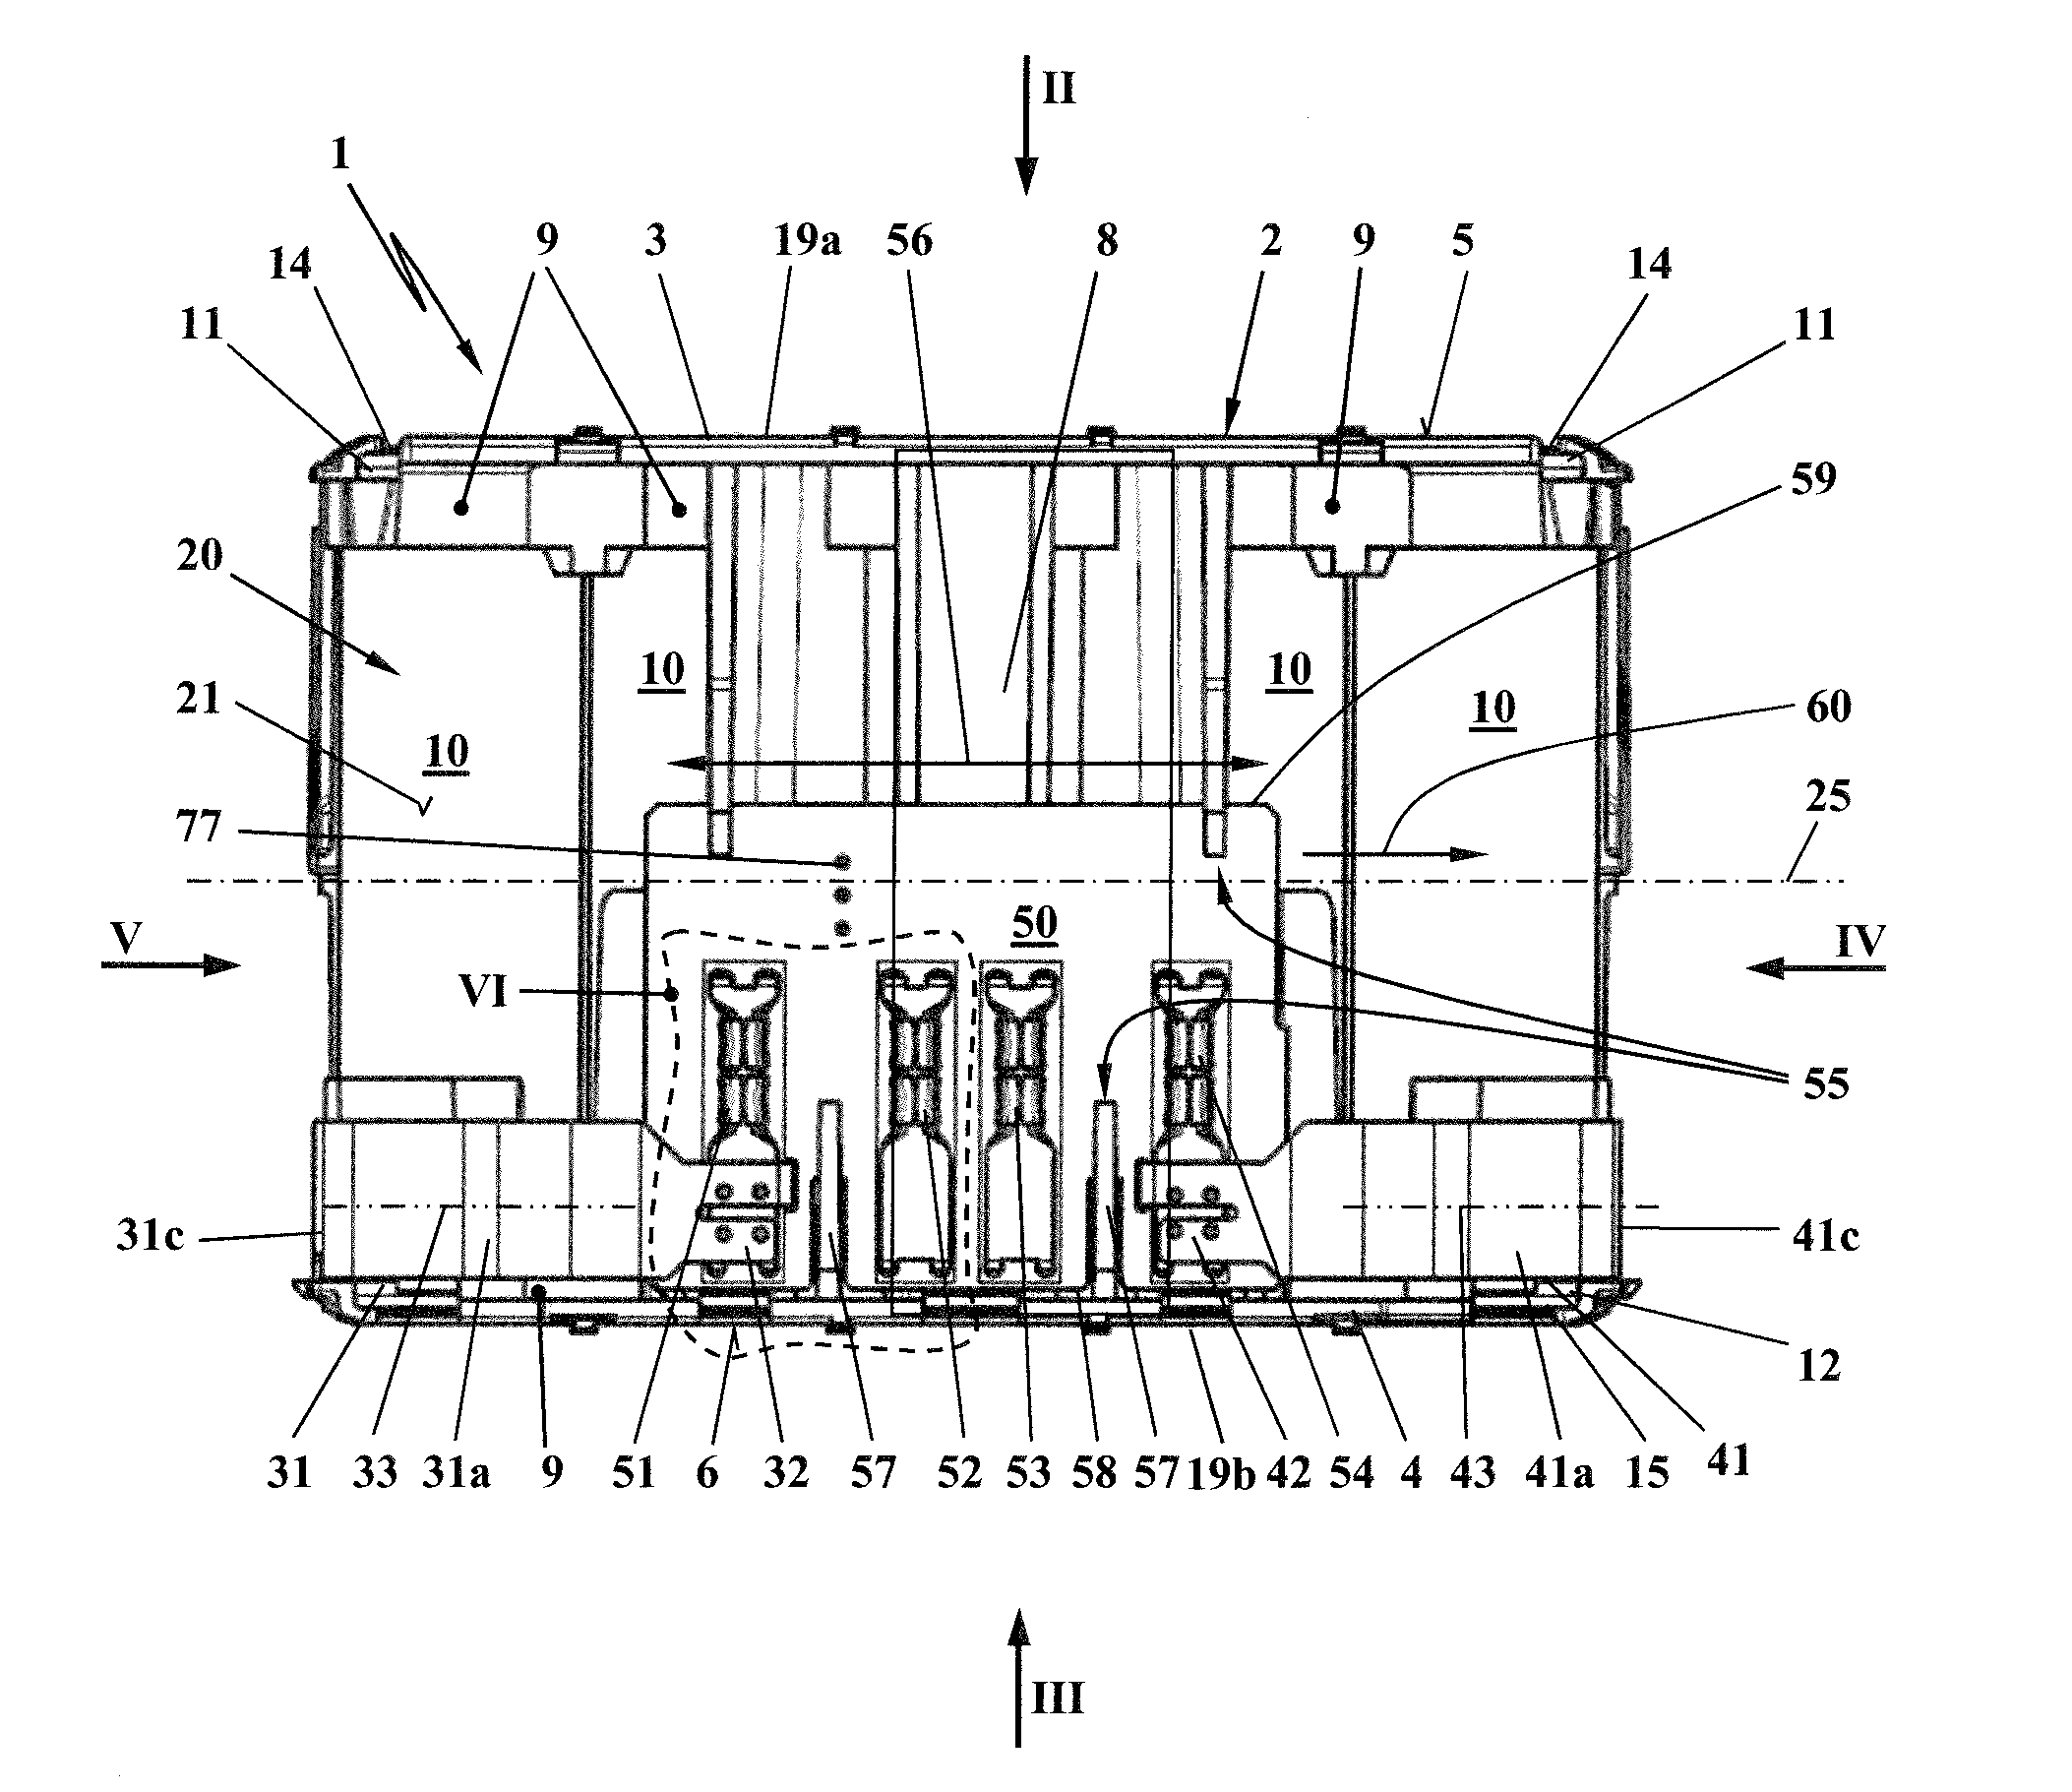 Rechargeable battery pack having a contact plate for connection to a load